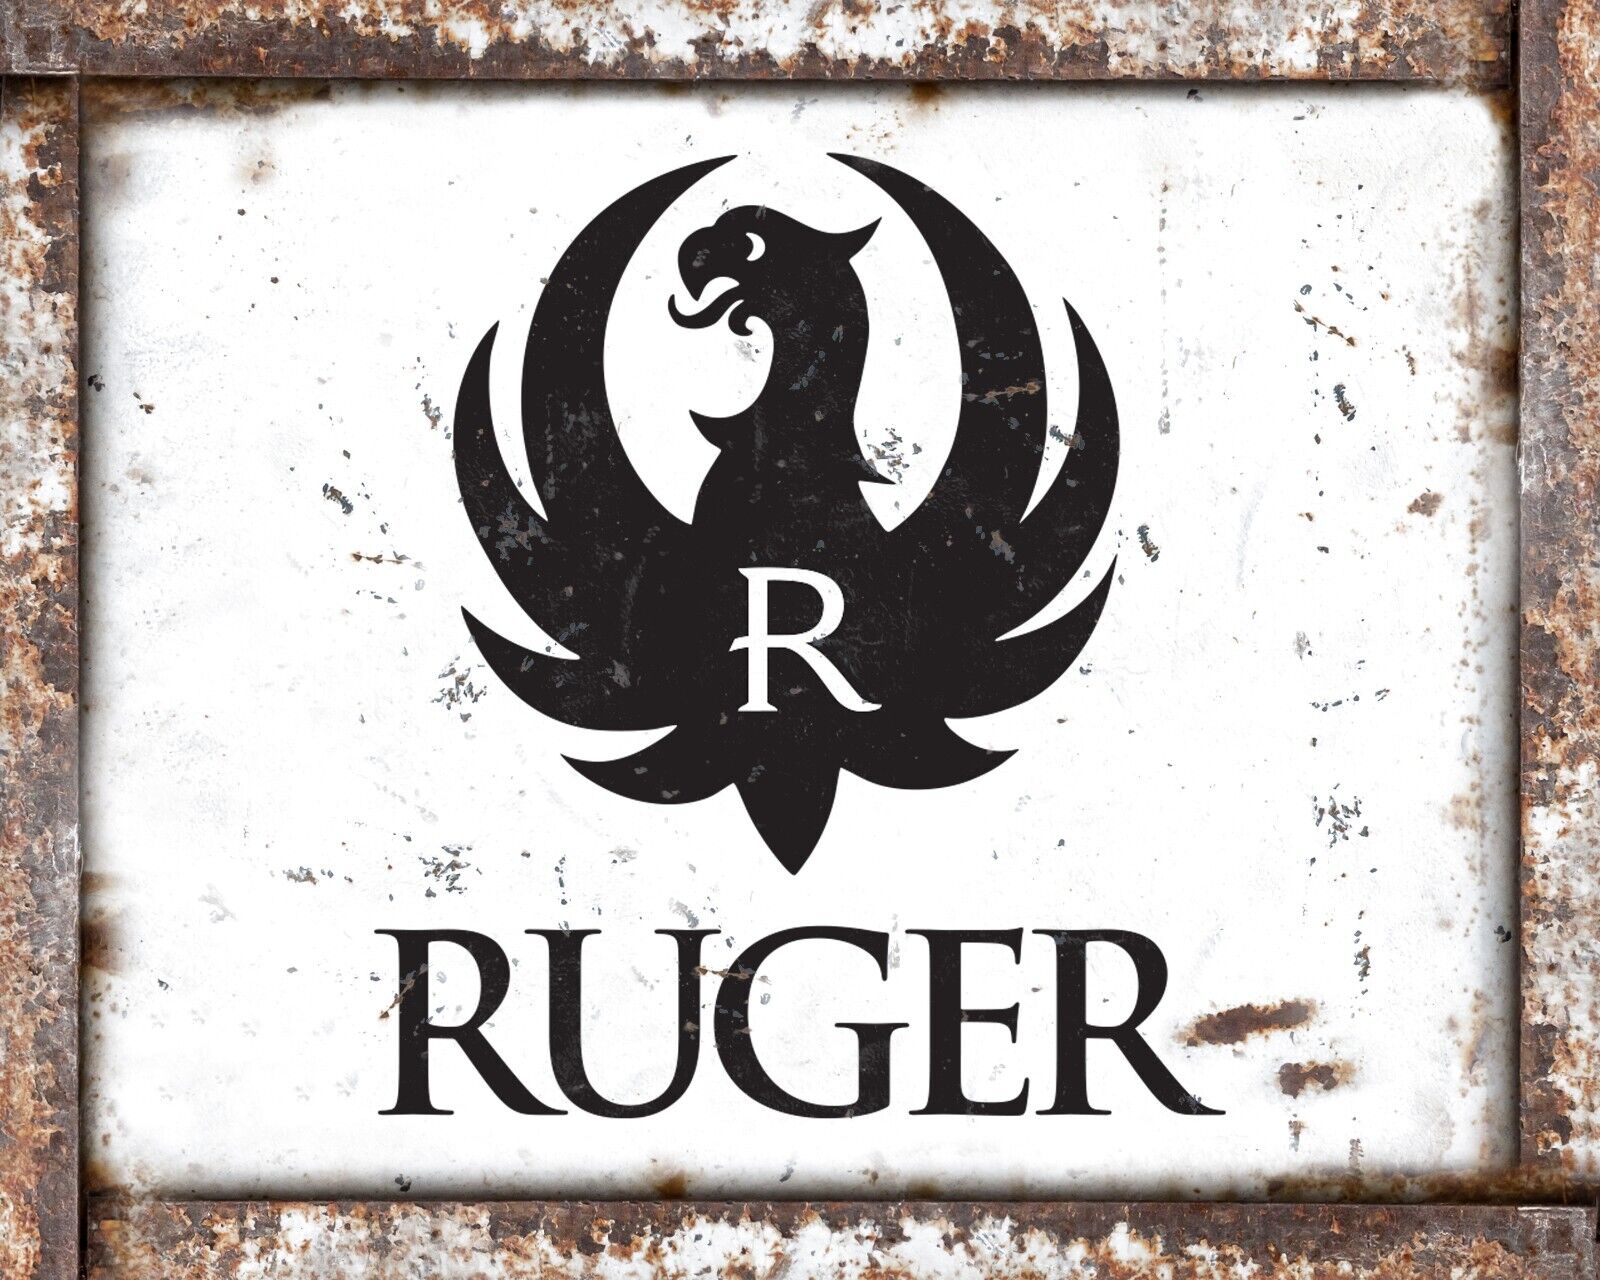 Ruger Firearms Black Phoenix 8x10 Rustic Vintage Style Tin Sign Metal Poster